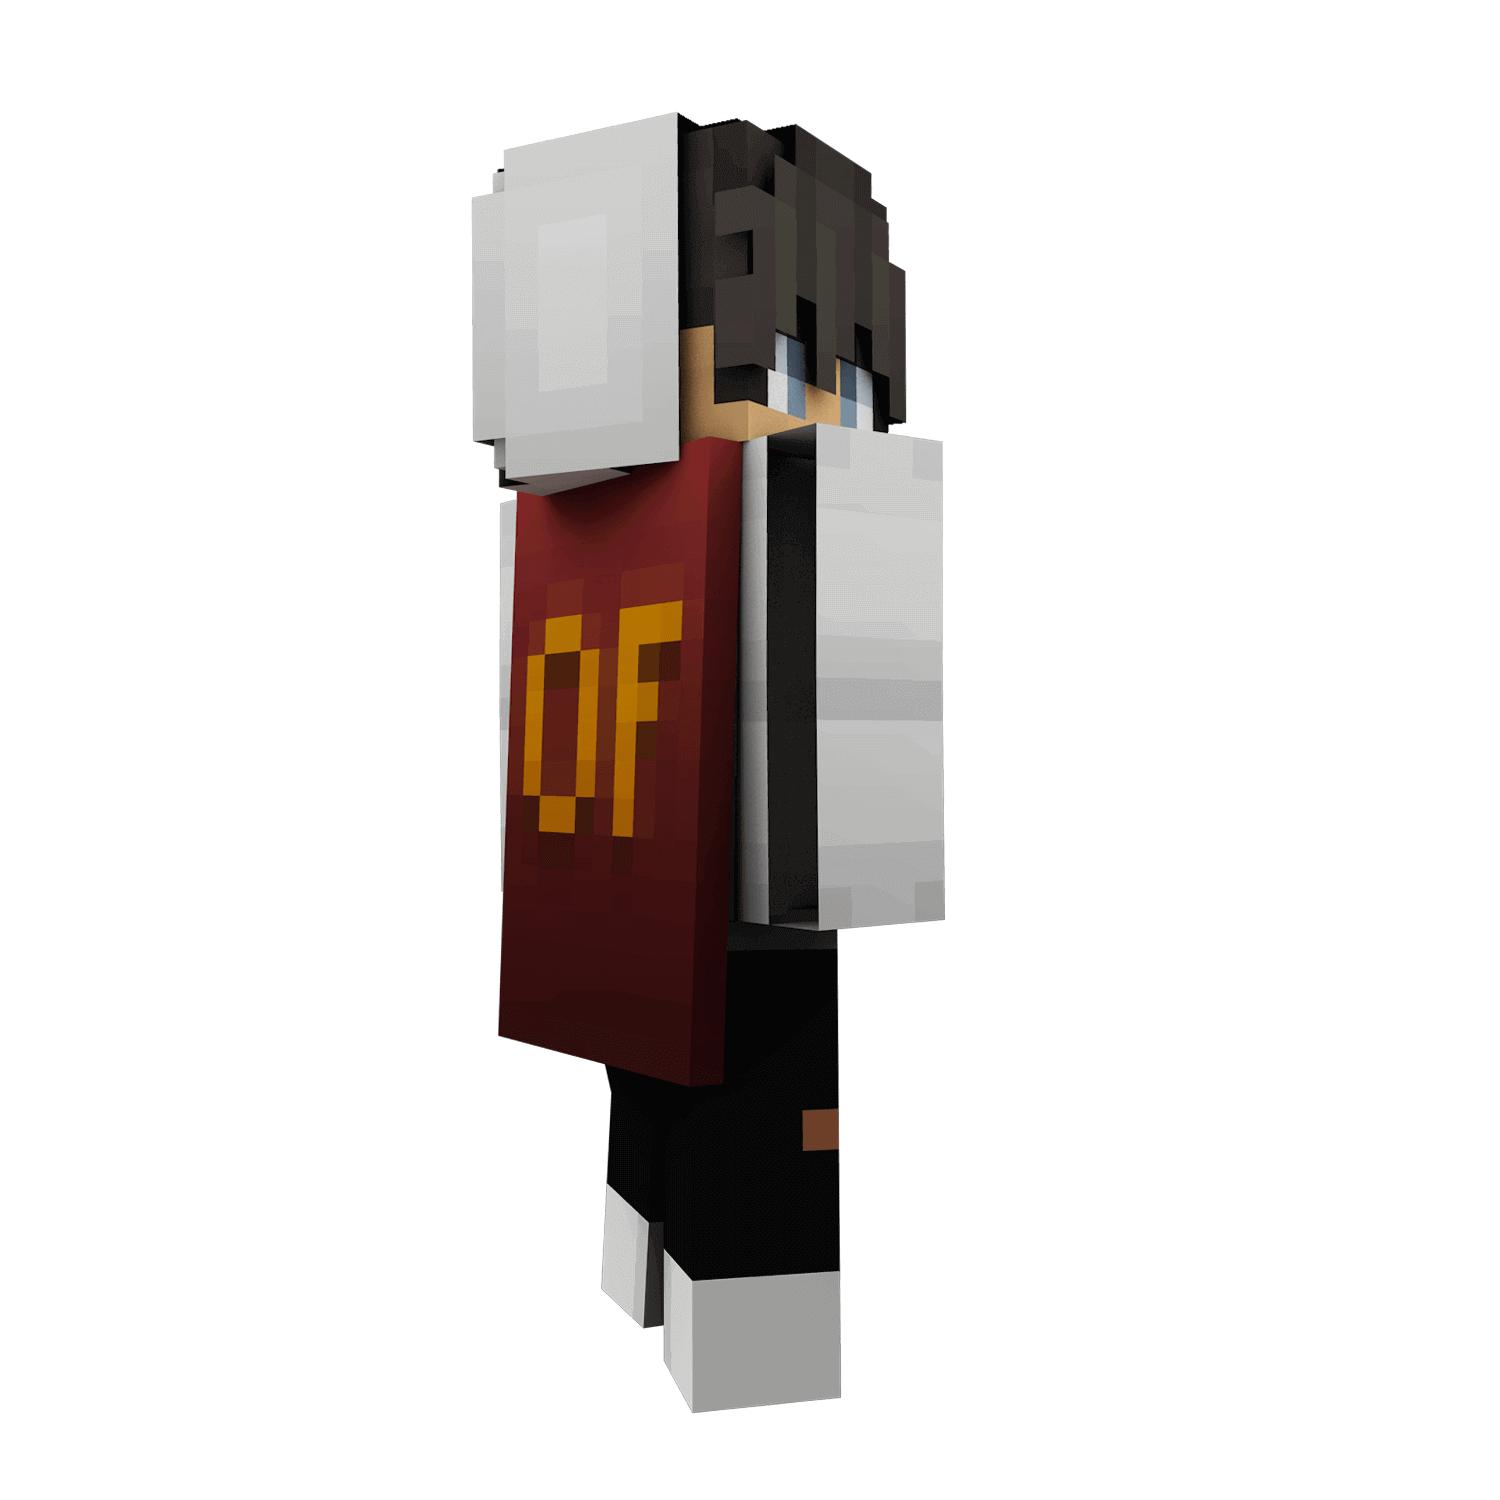 Optifine Cape with optifine.net donator account, you can login to its websi...